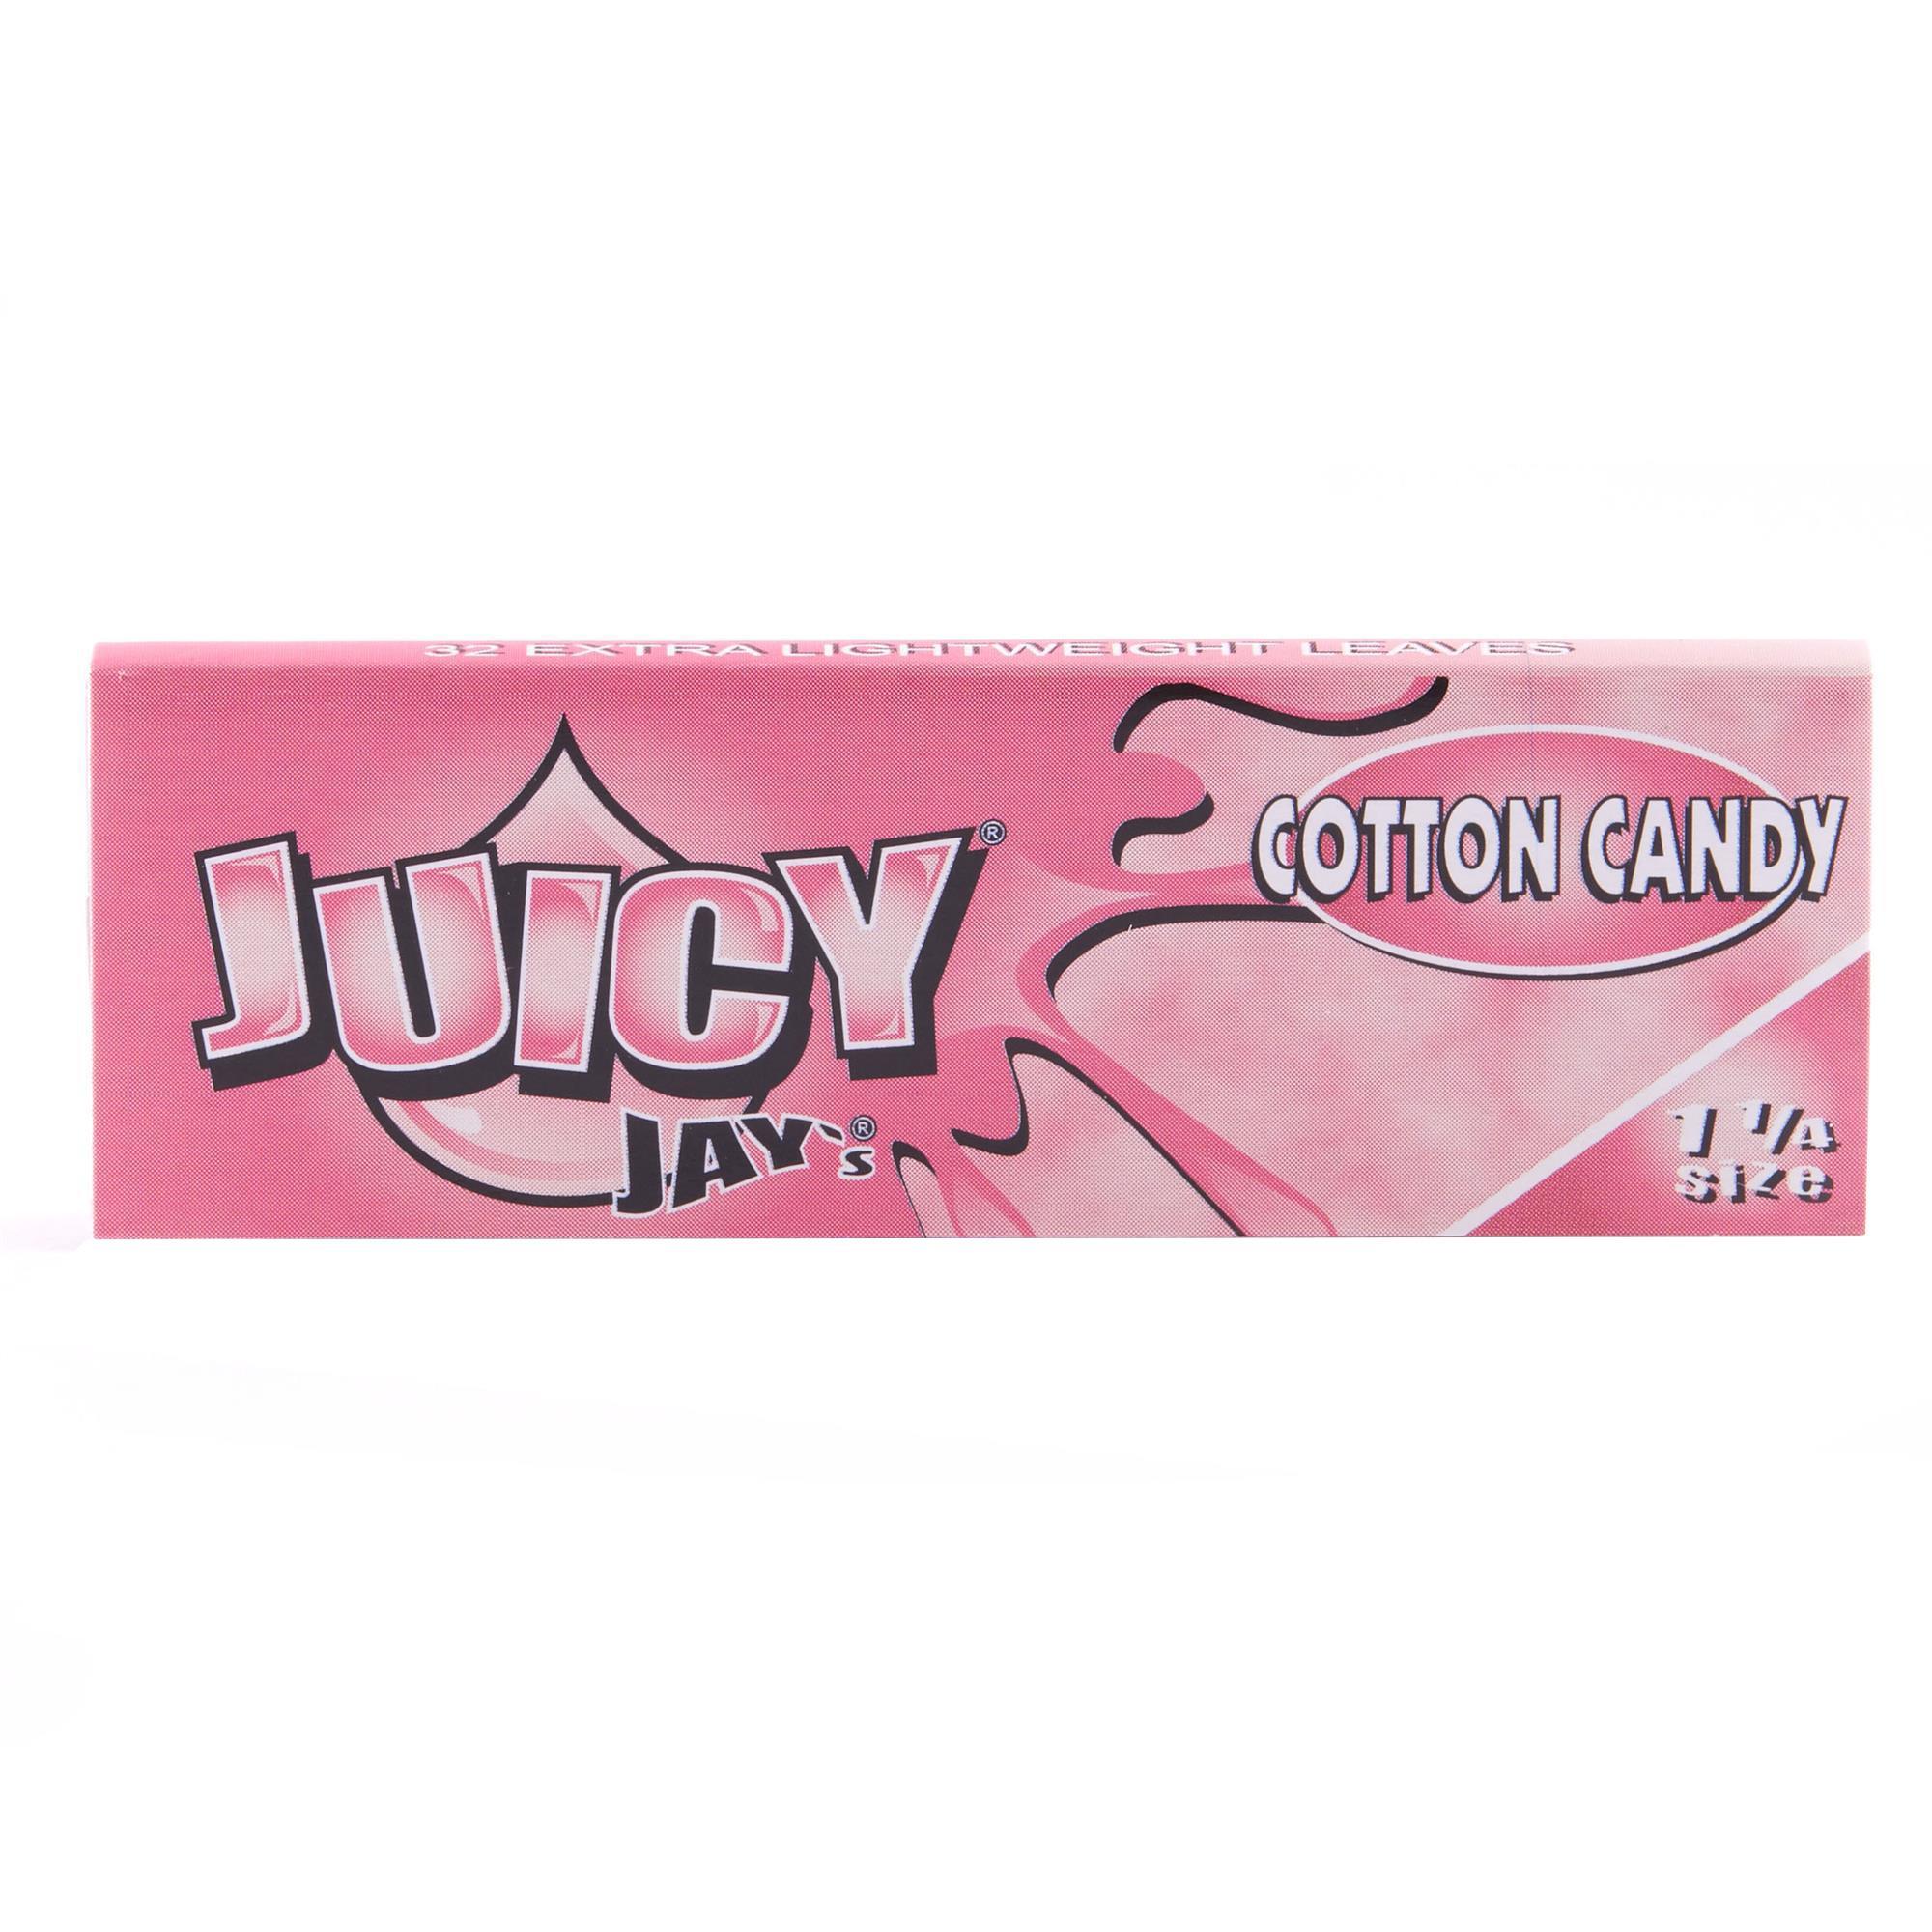 JUICY JAYS COTTON CANDY